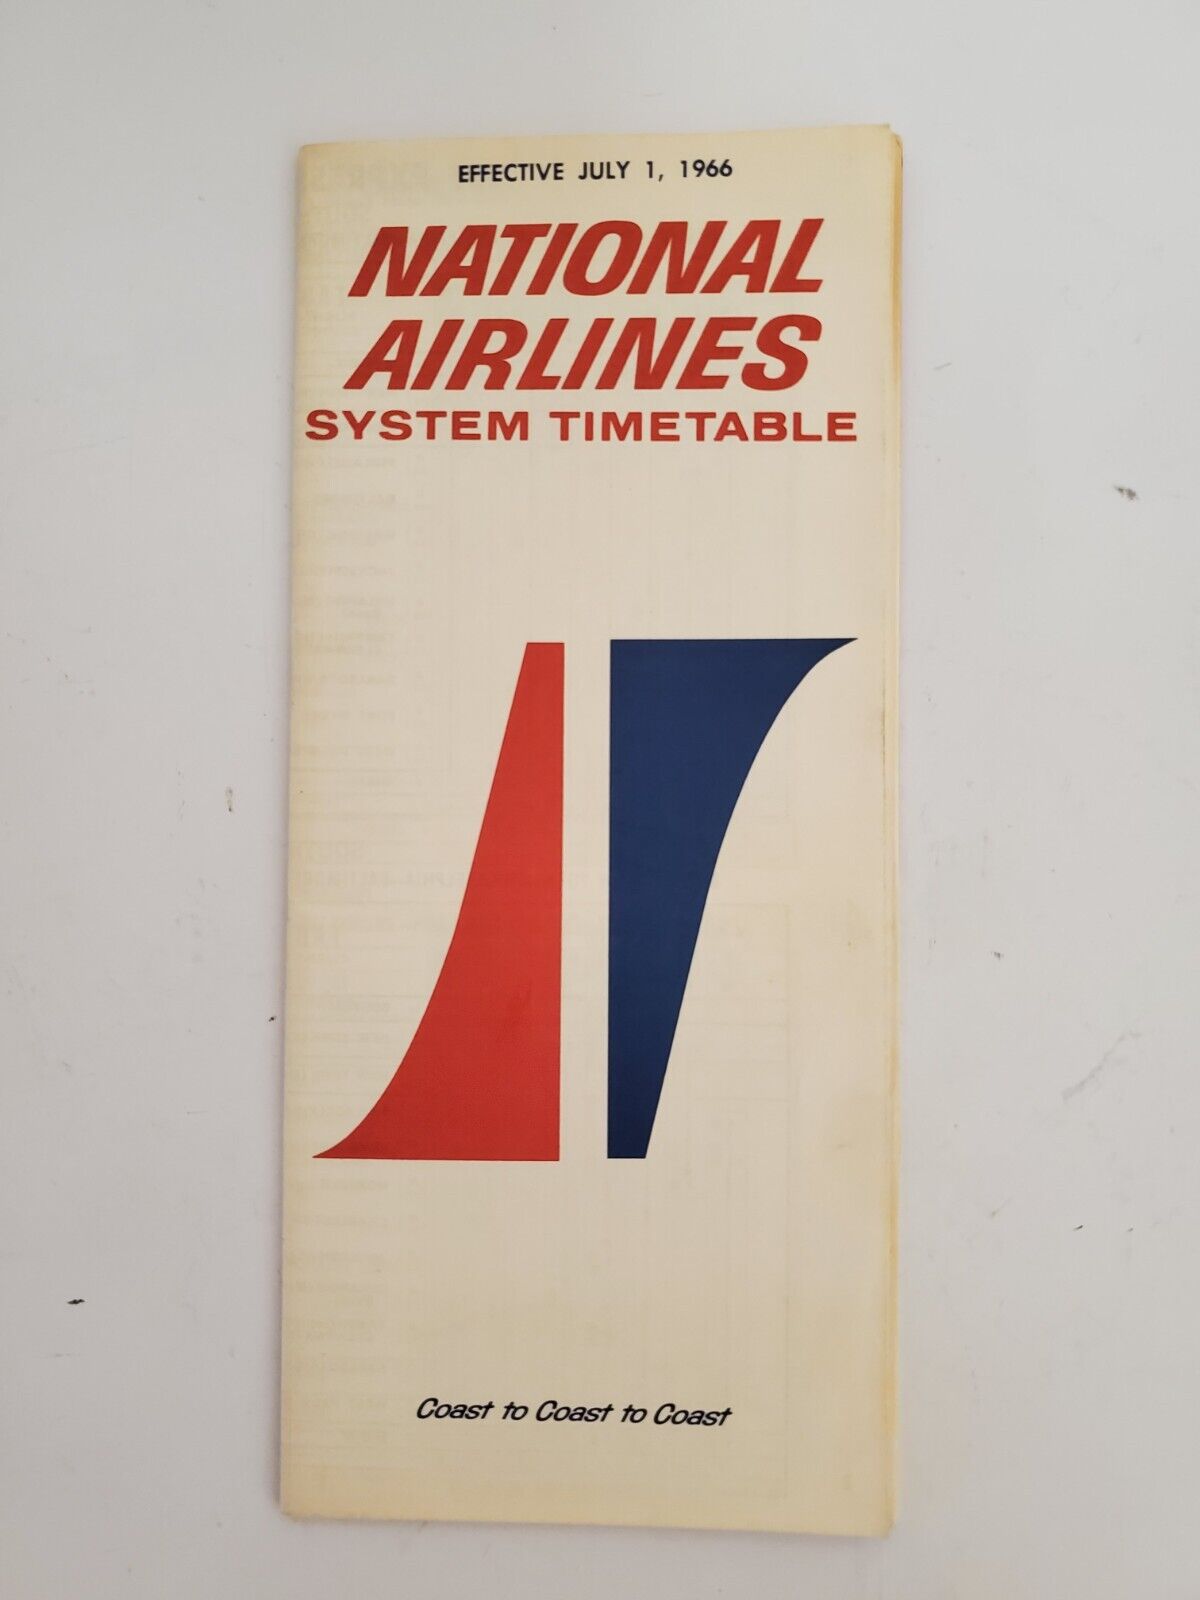 1966 National Airlines System Timetable - July 1 , 1966 Coast to Coast